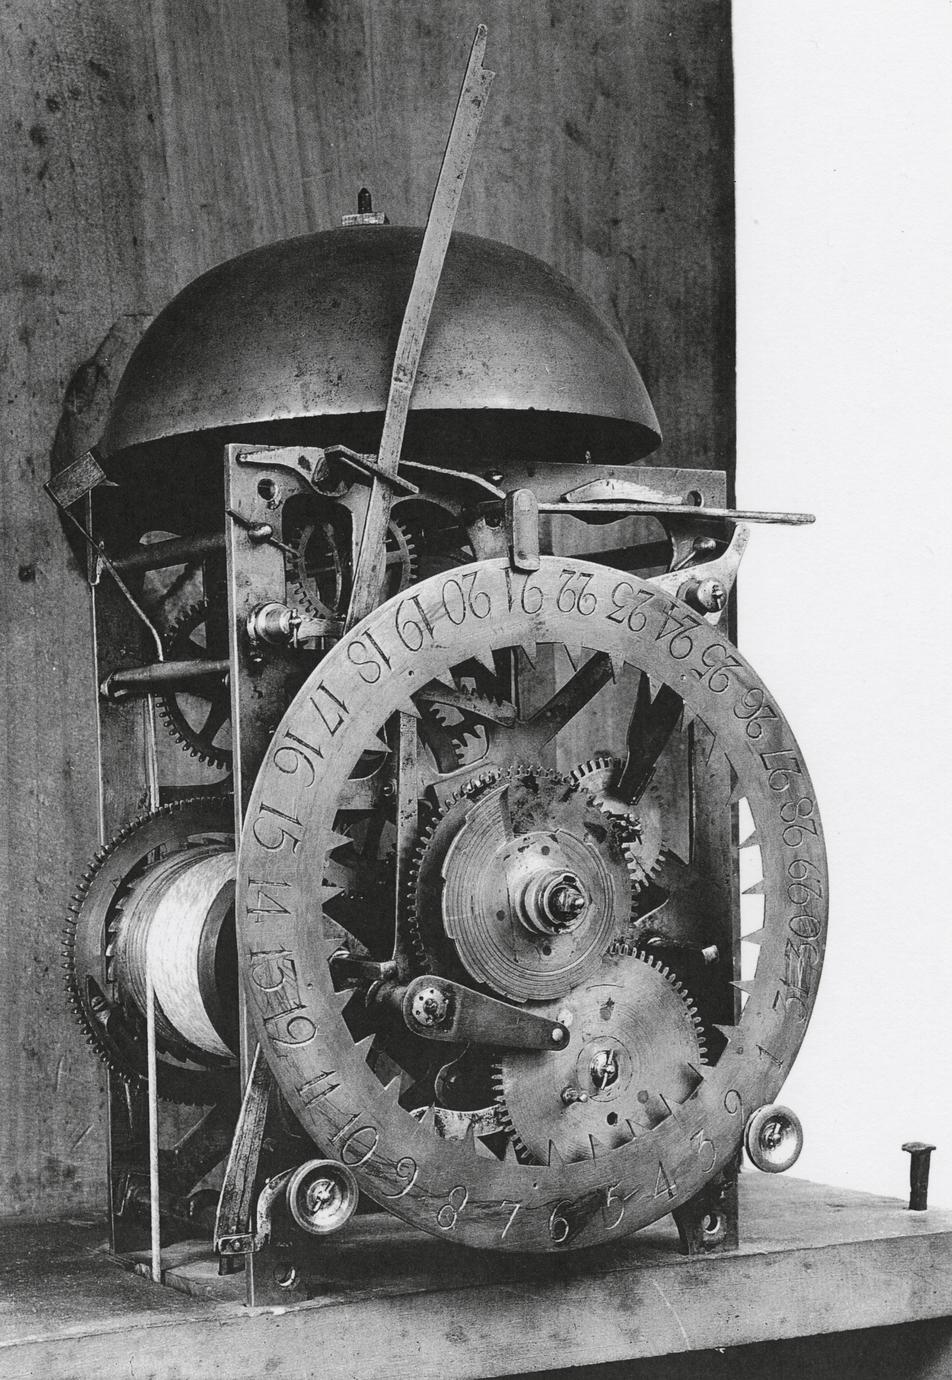 Black and white photograph of an eight-day, strike, repeater clock gear system.